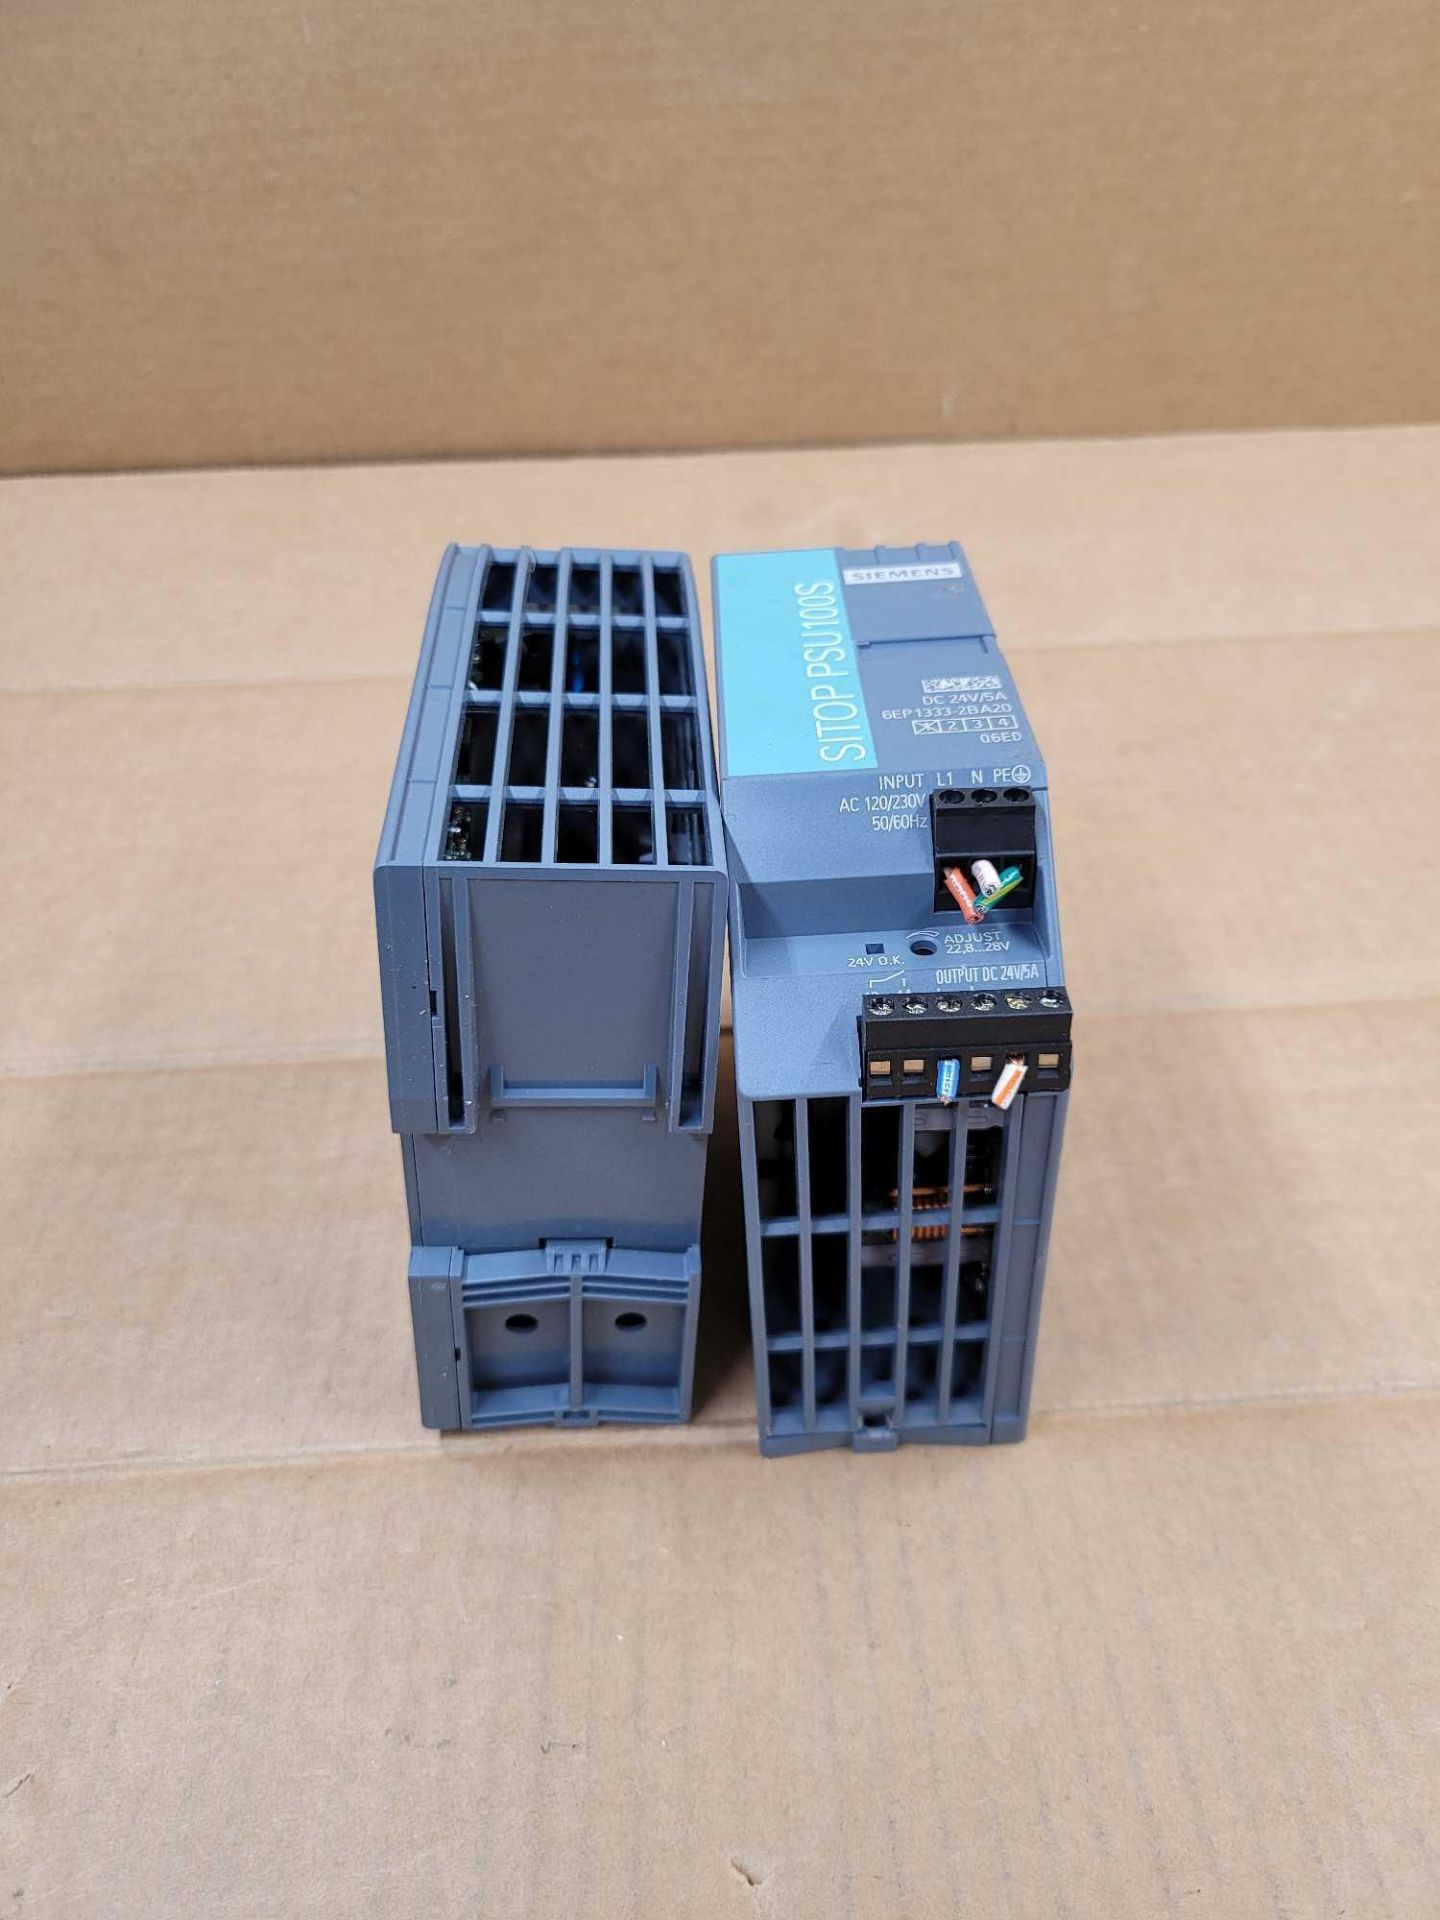 LOT OF 2 SIEMENS 6EP1333-2BA20 / Sitop PSU100S Power Supply  /  Lot Weight: 1.8 lbs - Image 5 of 5